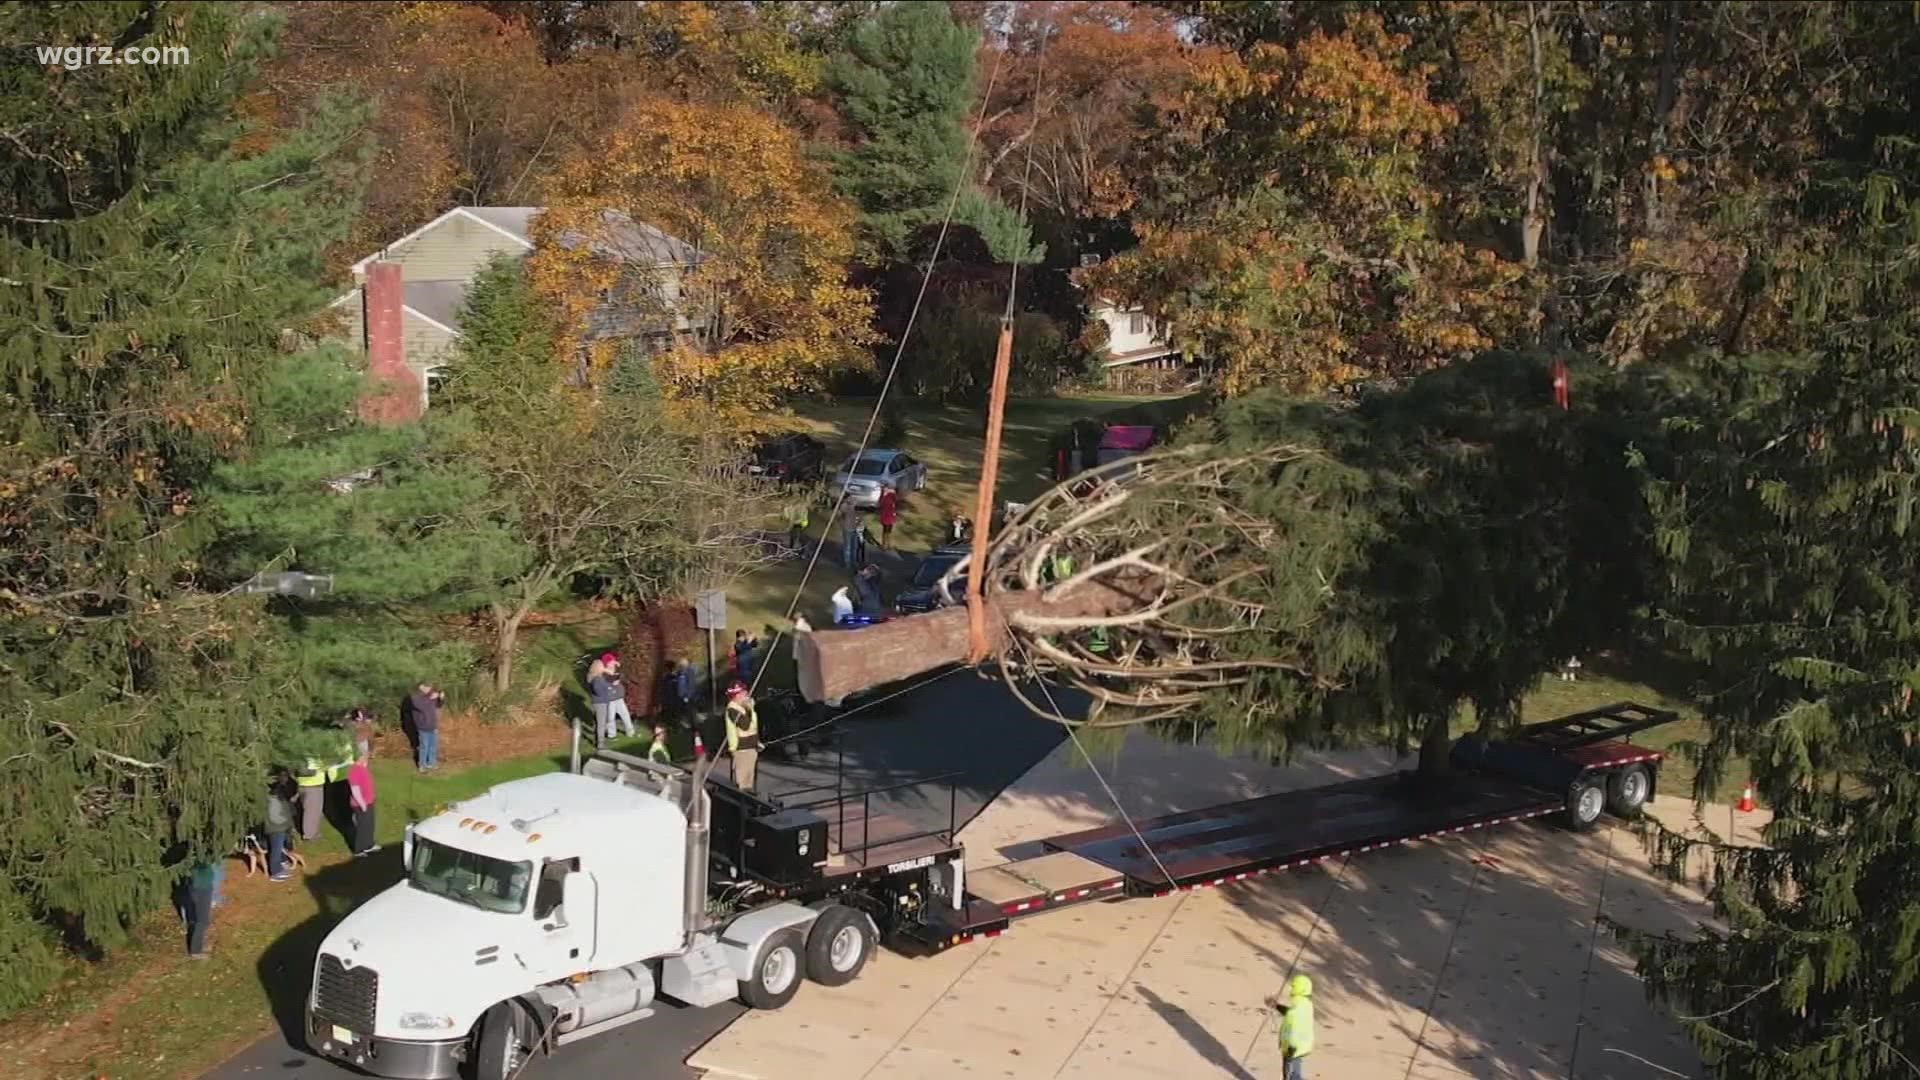 Rockefeller tree making its way to NYC